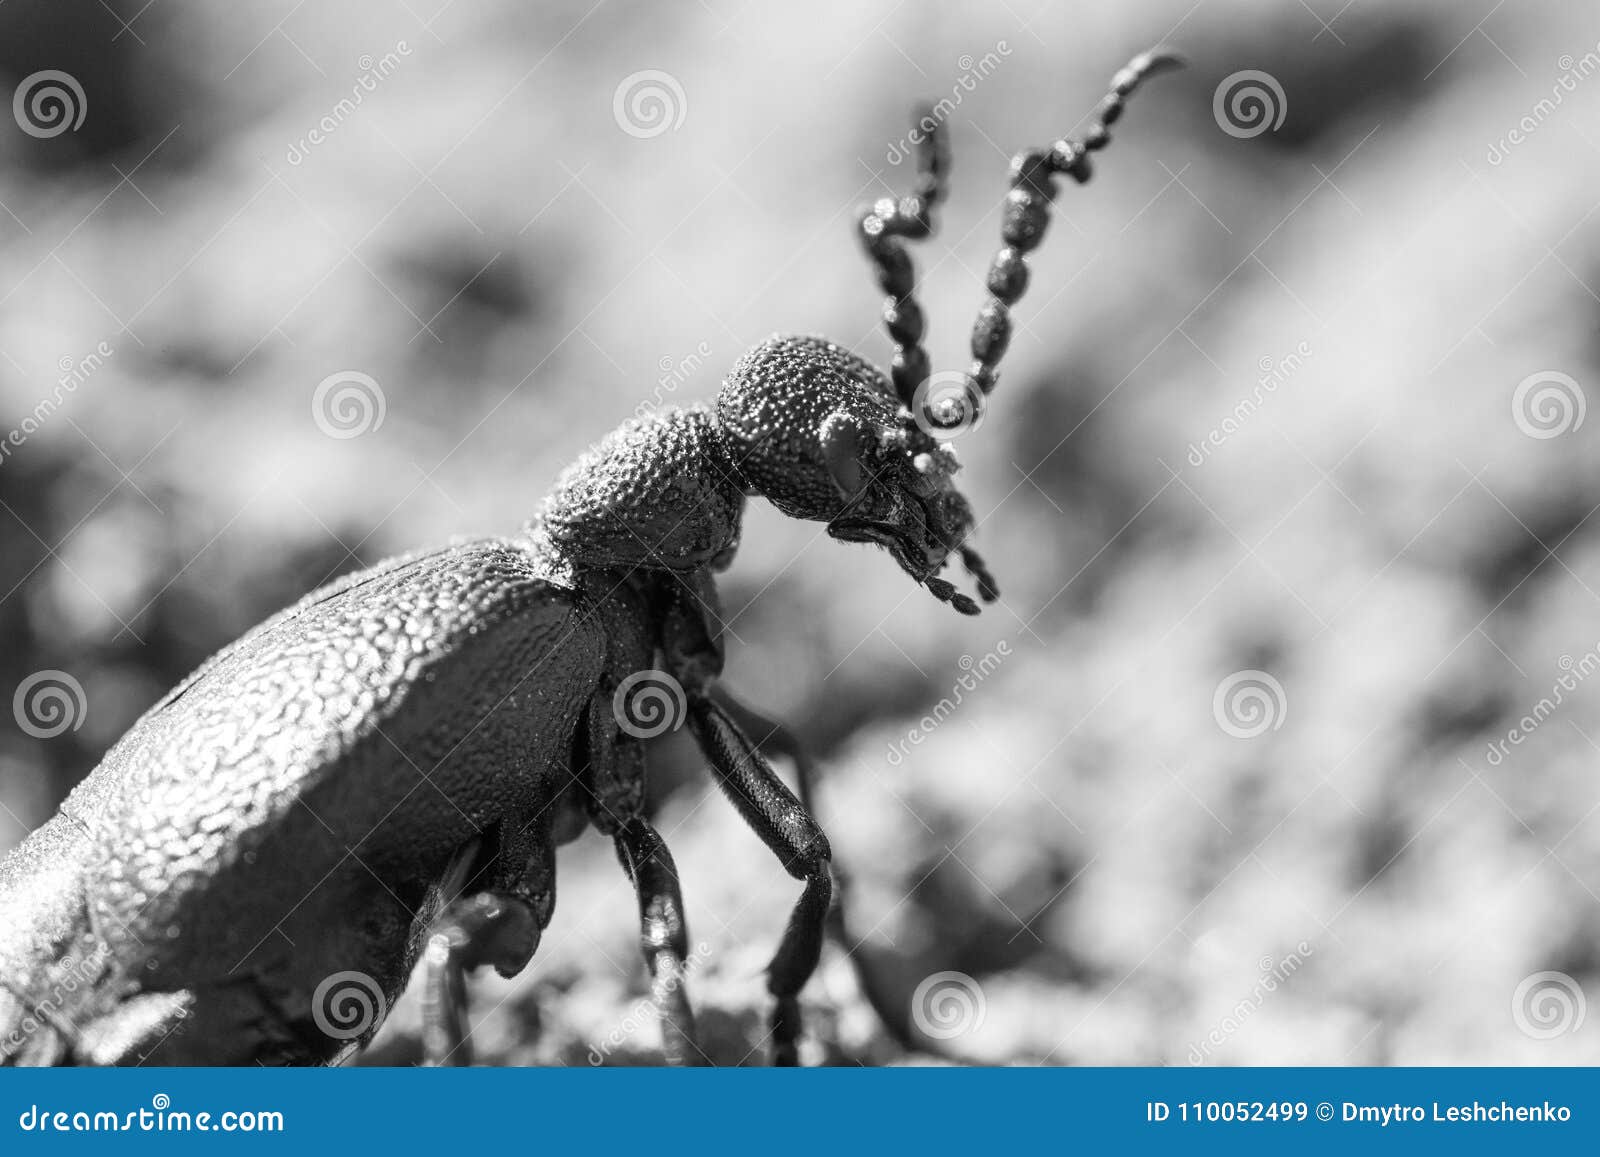 Animal, Beetle, Carapace, Day, Horns, Insect, Macro ...